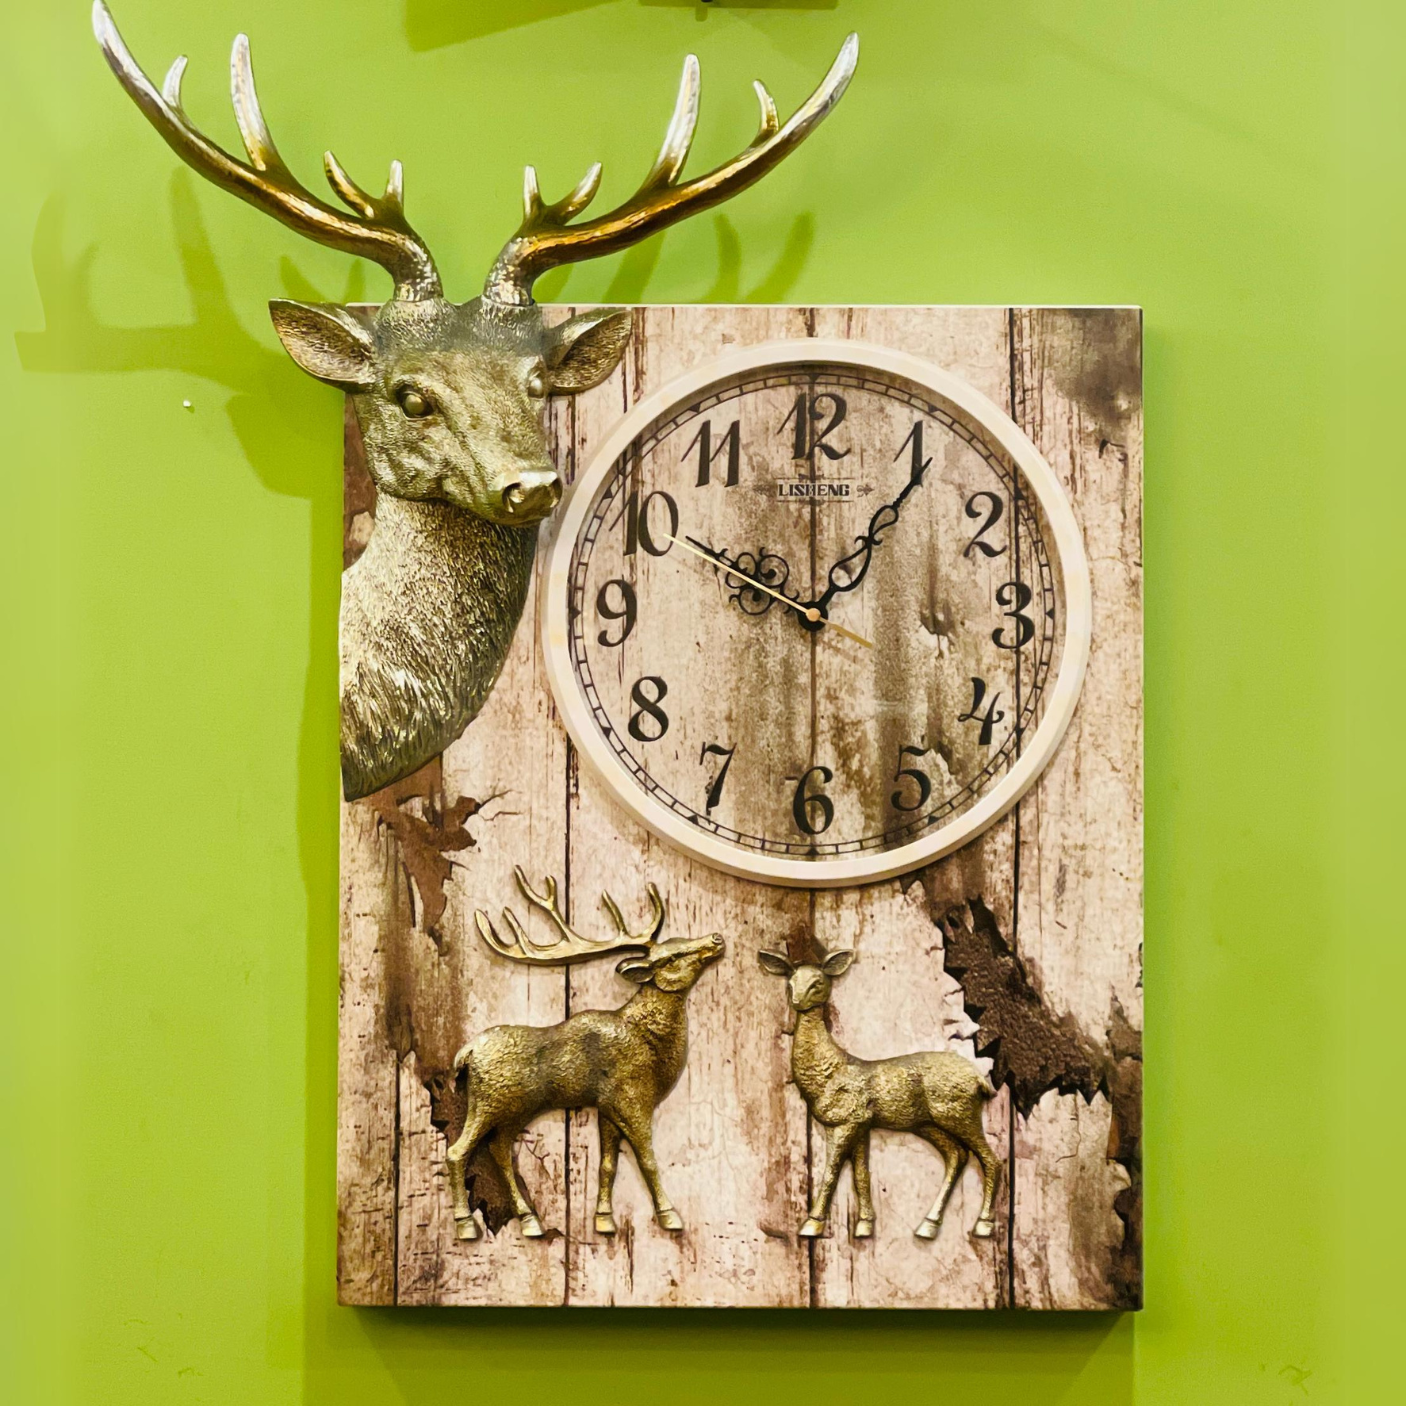 CHARLING WALL CLOCK WITH GOAT ART FRAME